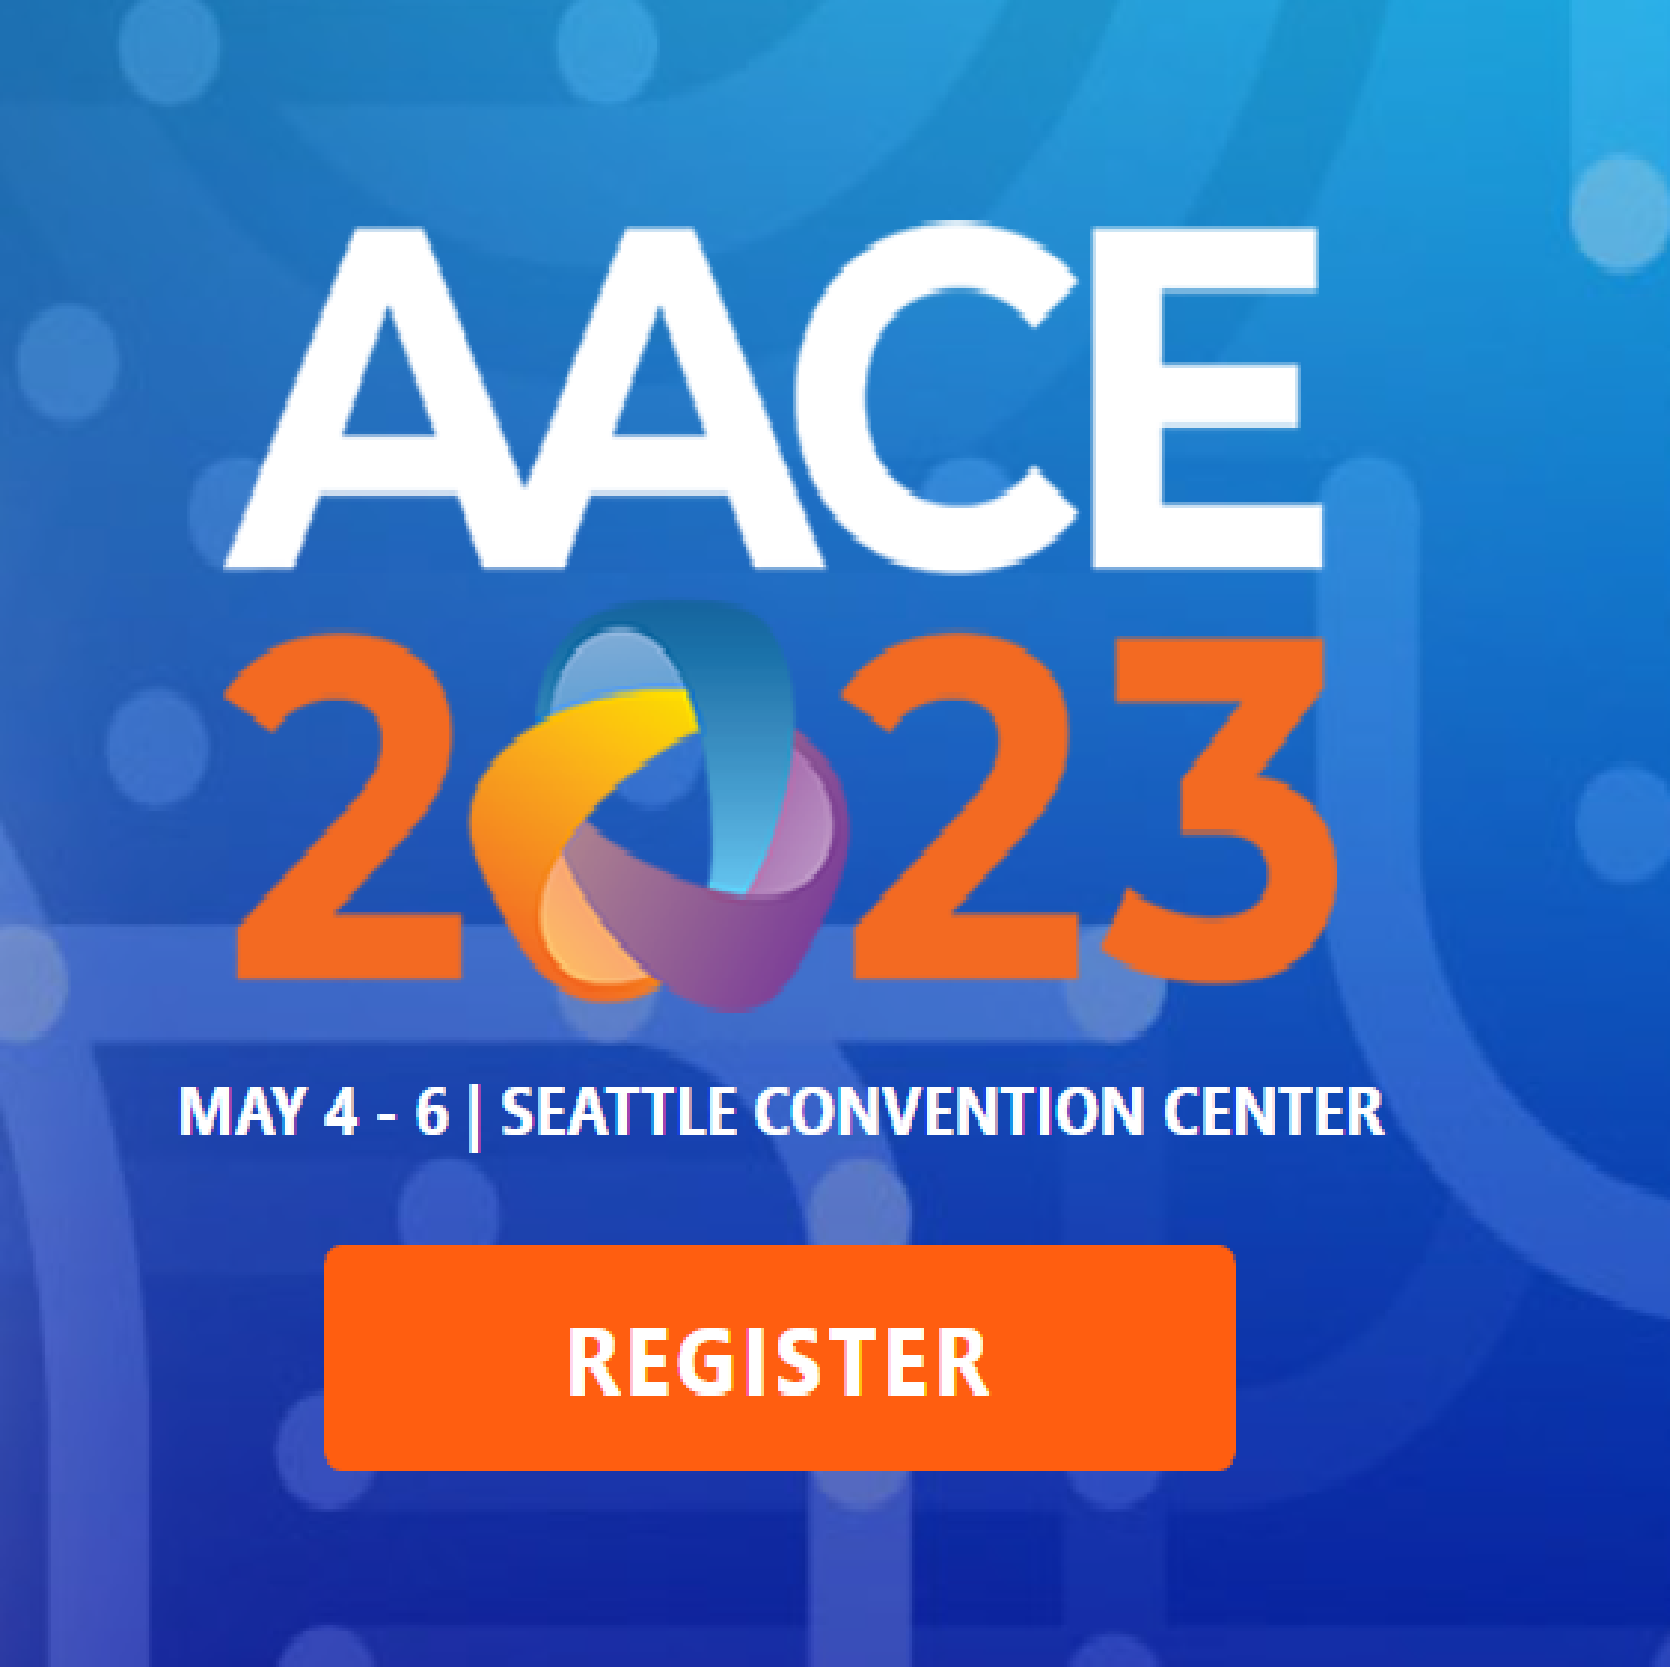 AACE Annual Meeting 2023